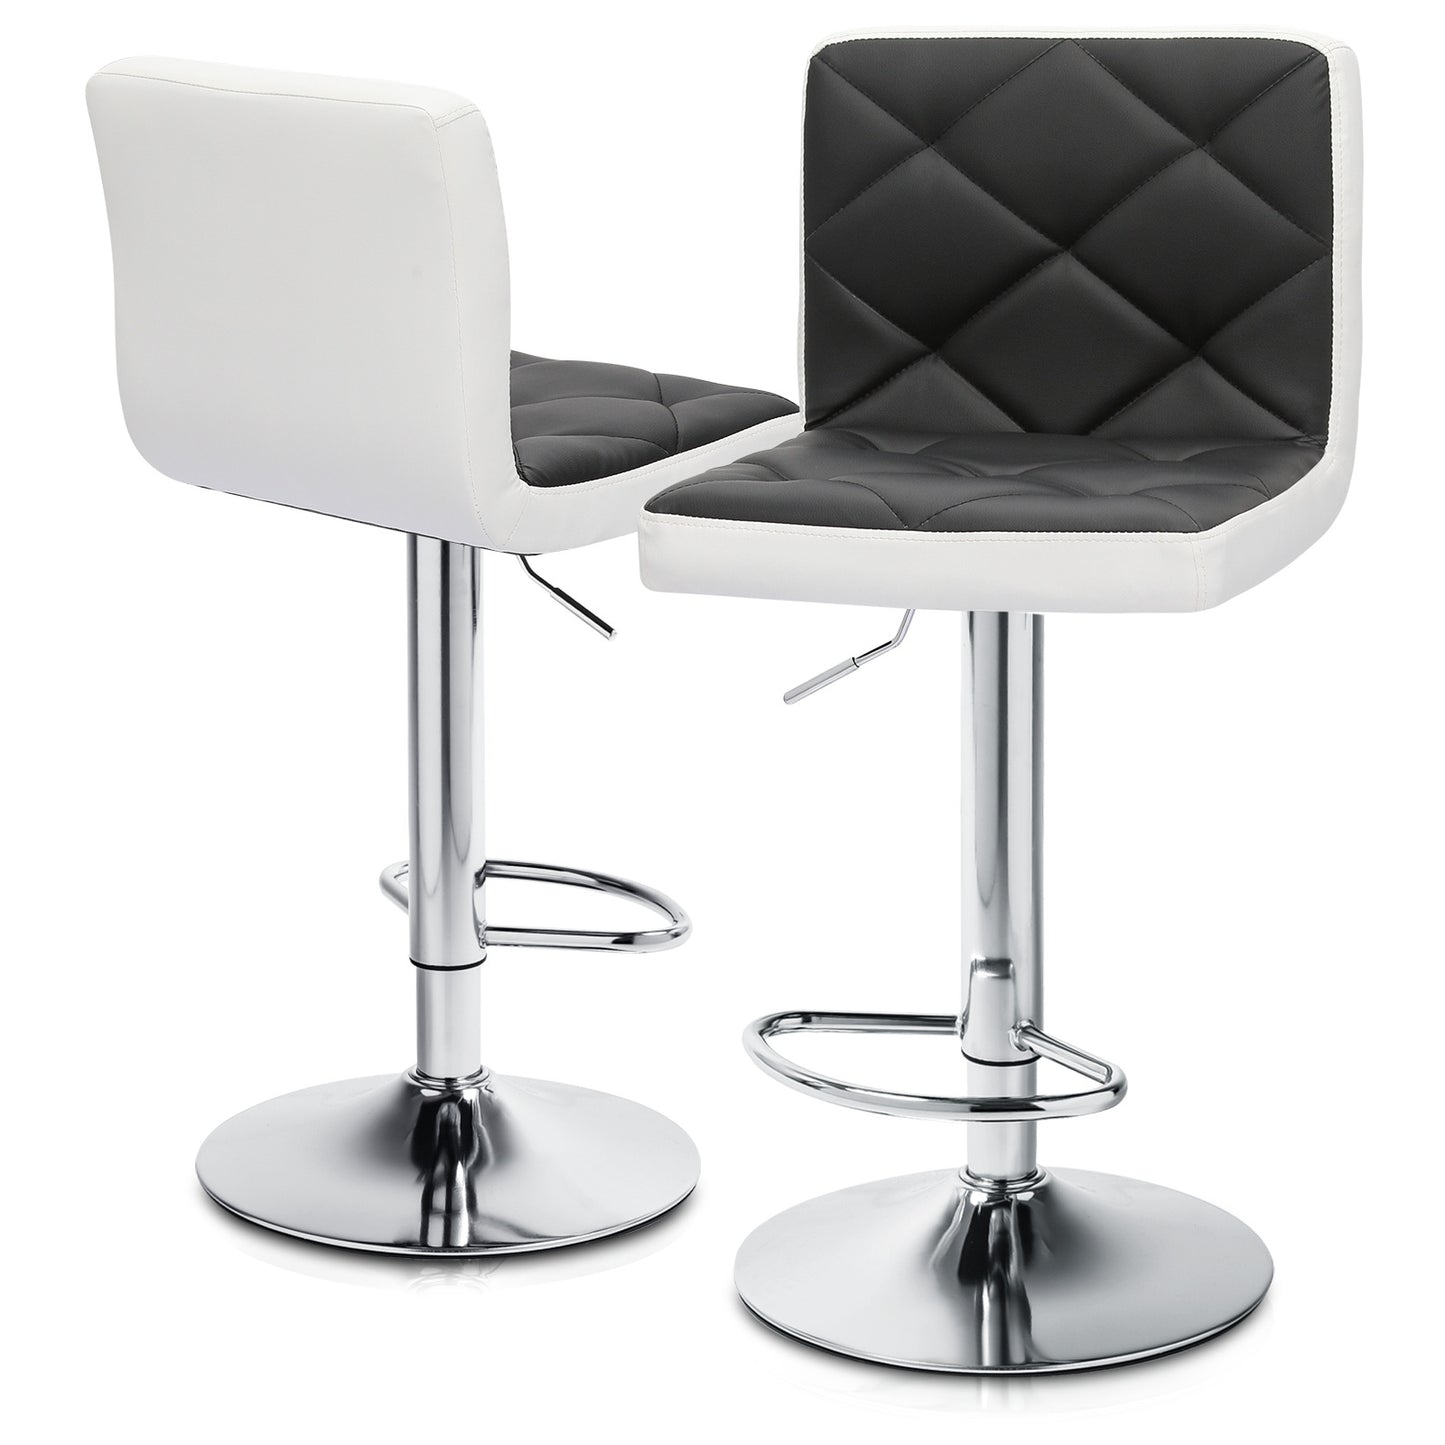 Set of 2 Leather Bar Stool Modern Adjustable Swivel Kitchen Counter Height Chair